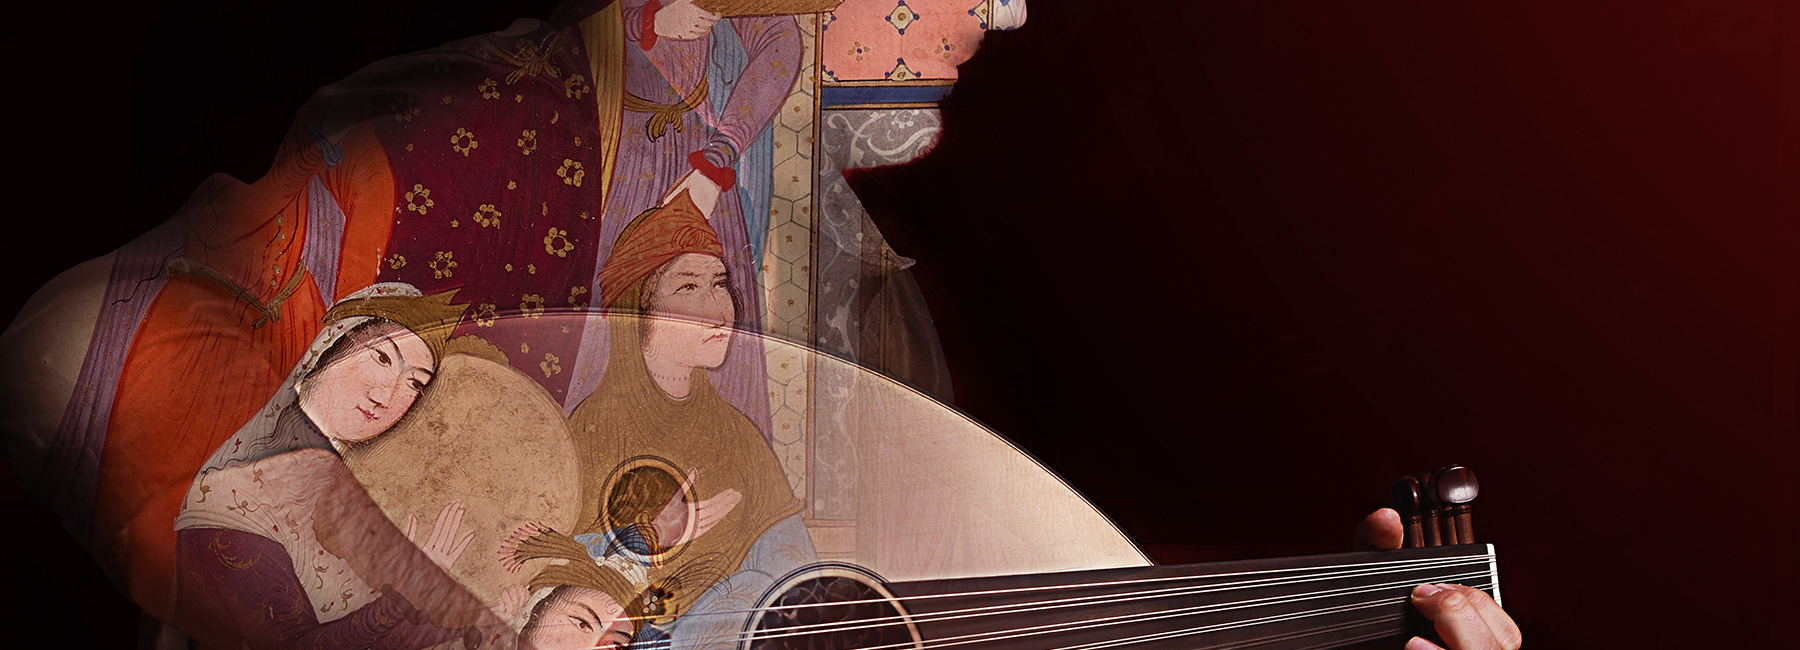 An image of a Persian watercolour featuring three headscarf-wearing women superimposed over the picture of a hand playing an oud.